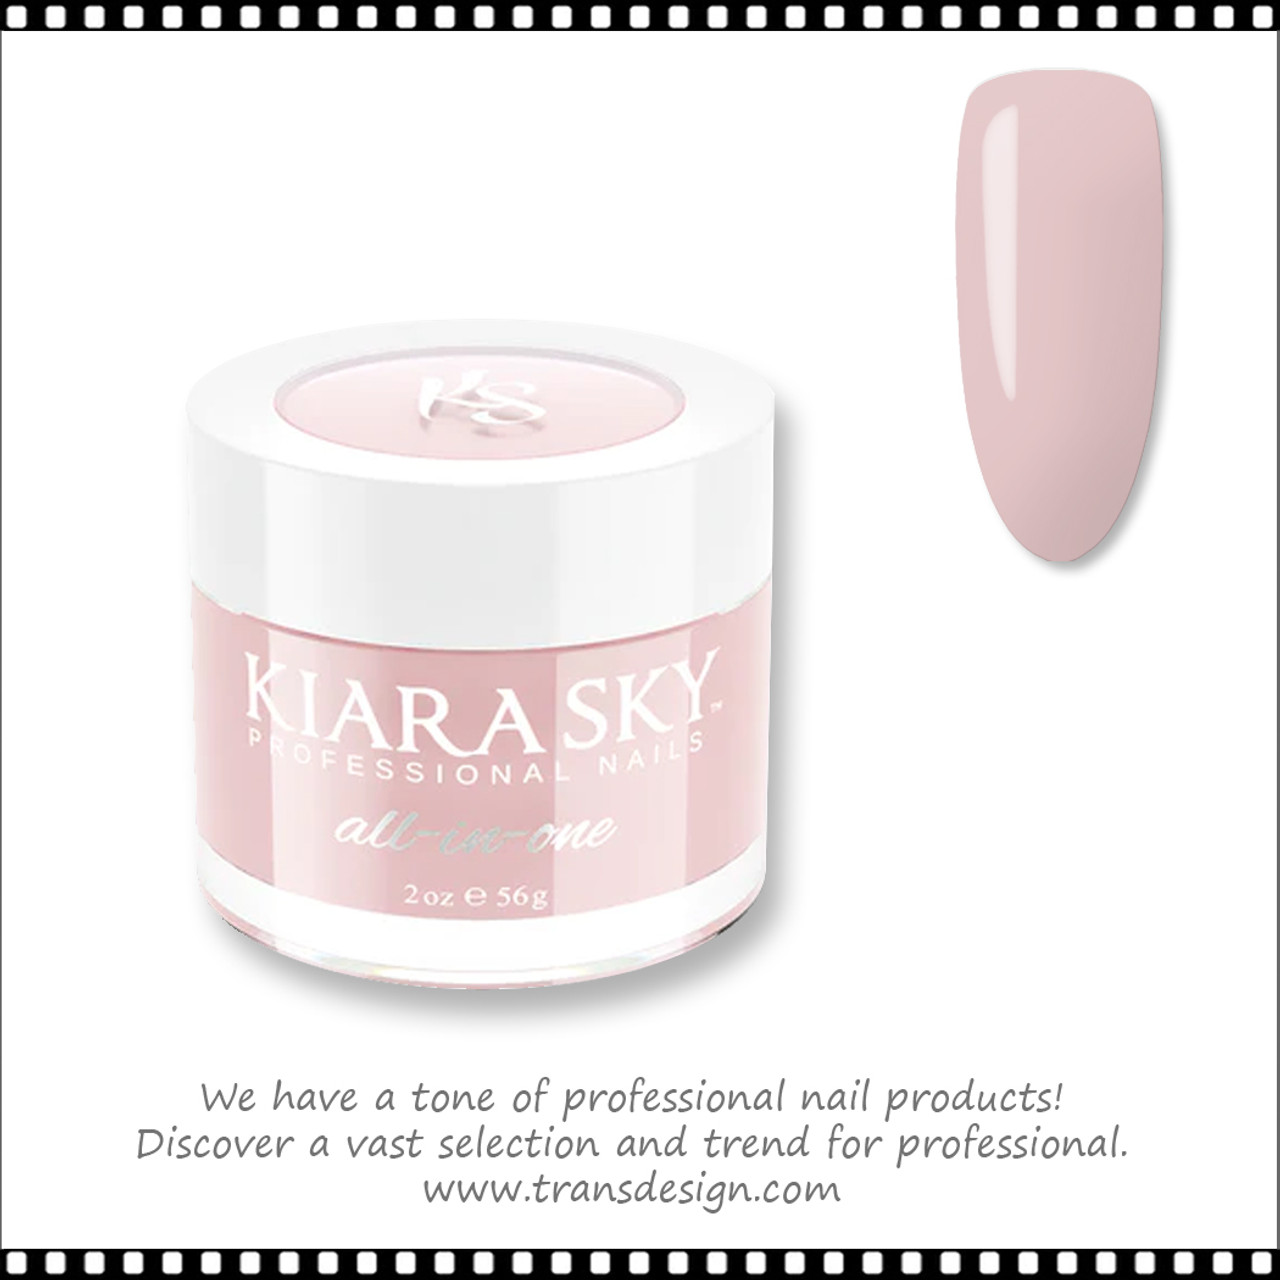 Kiara Sky Sprinkle On Glitter Collection (All I can Pink of) : Amazon.in:  Beauty